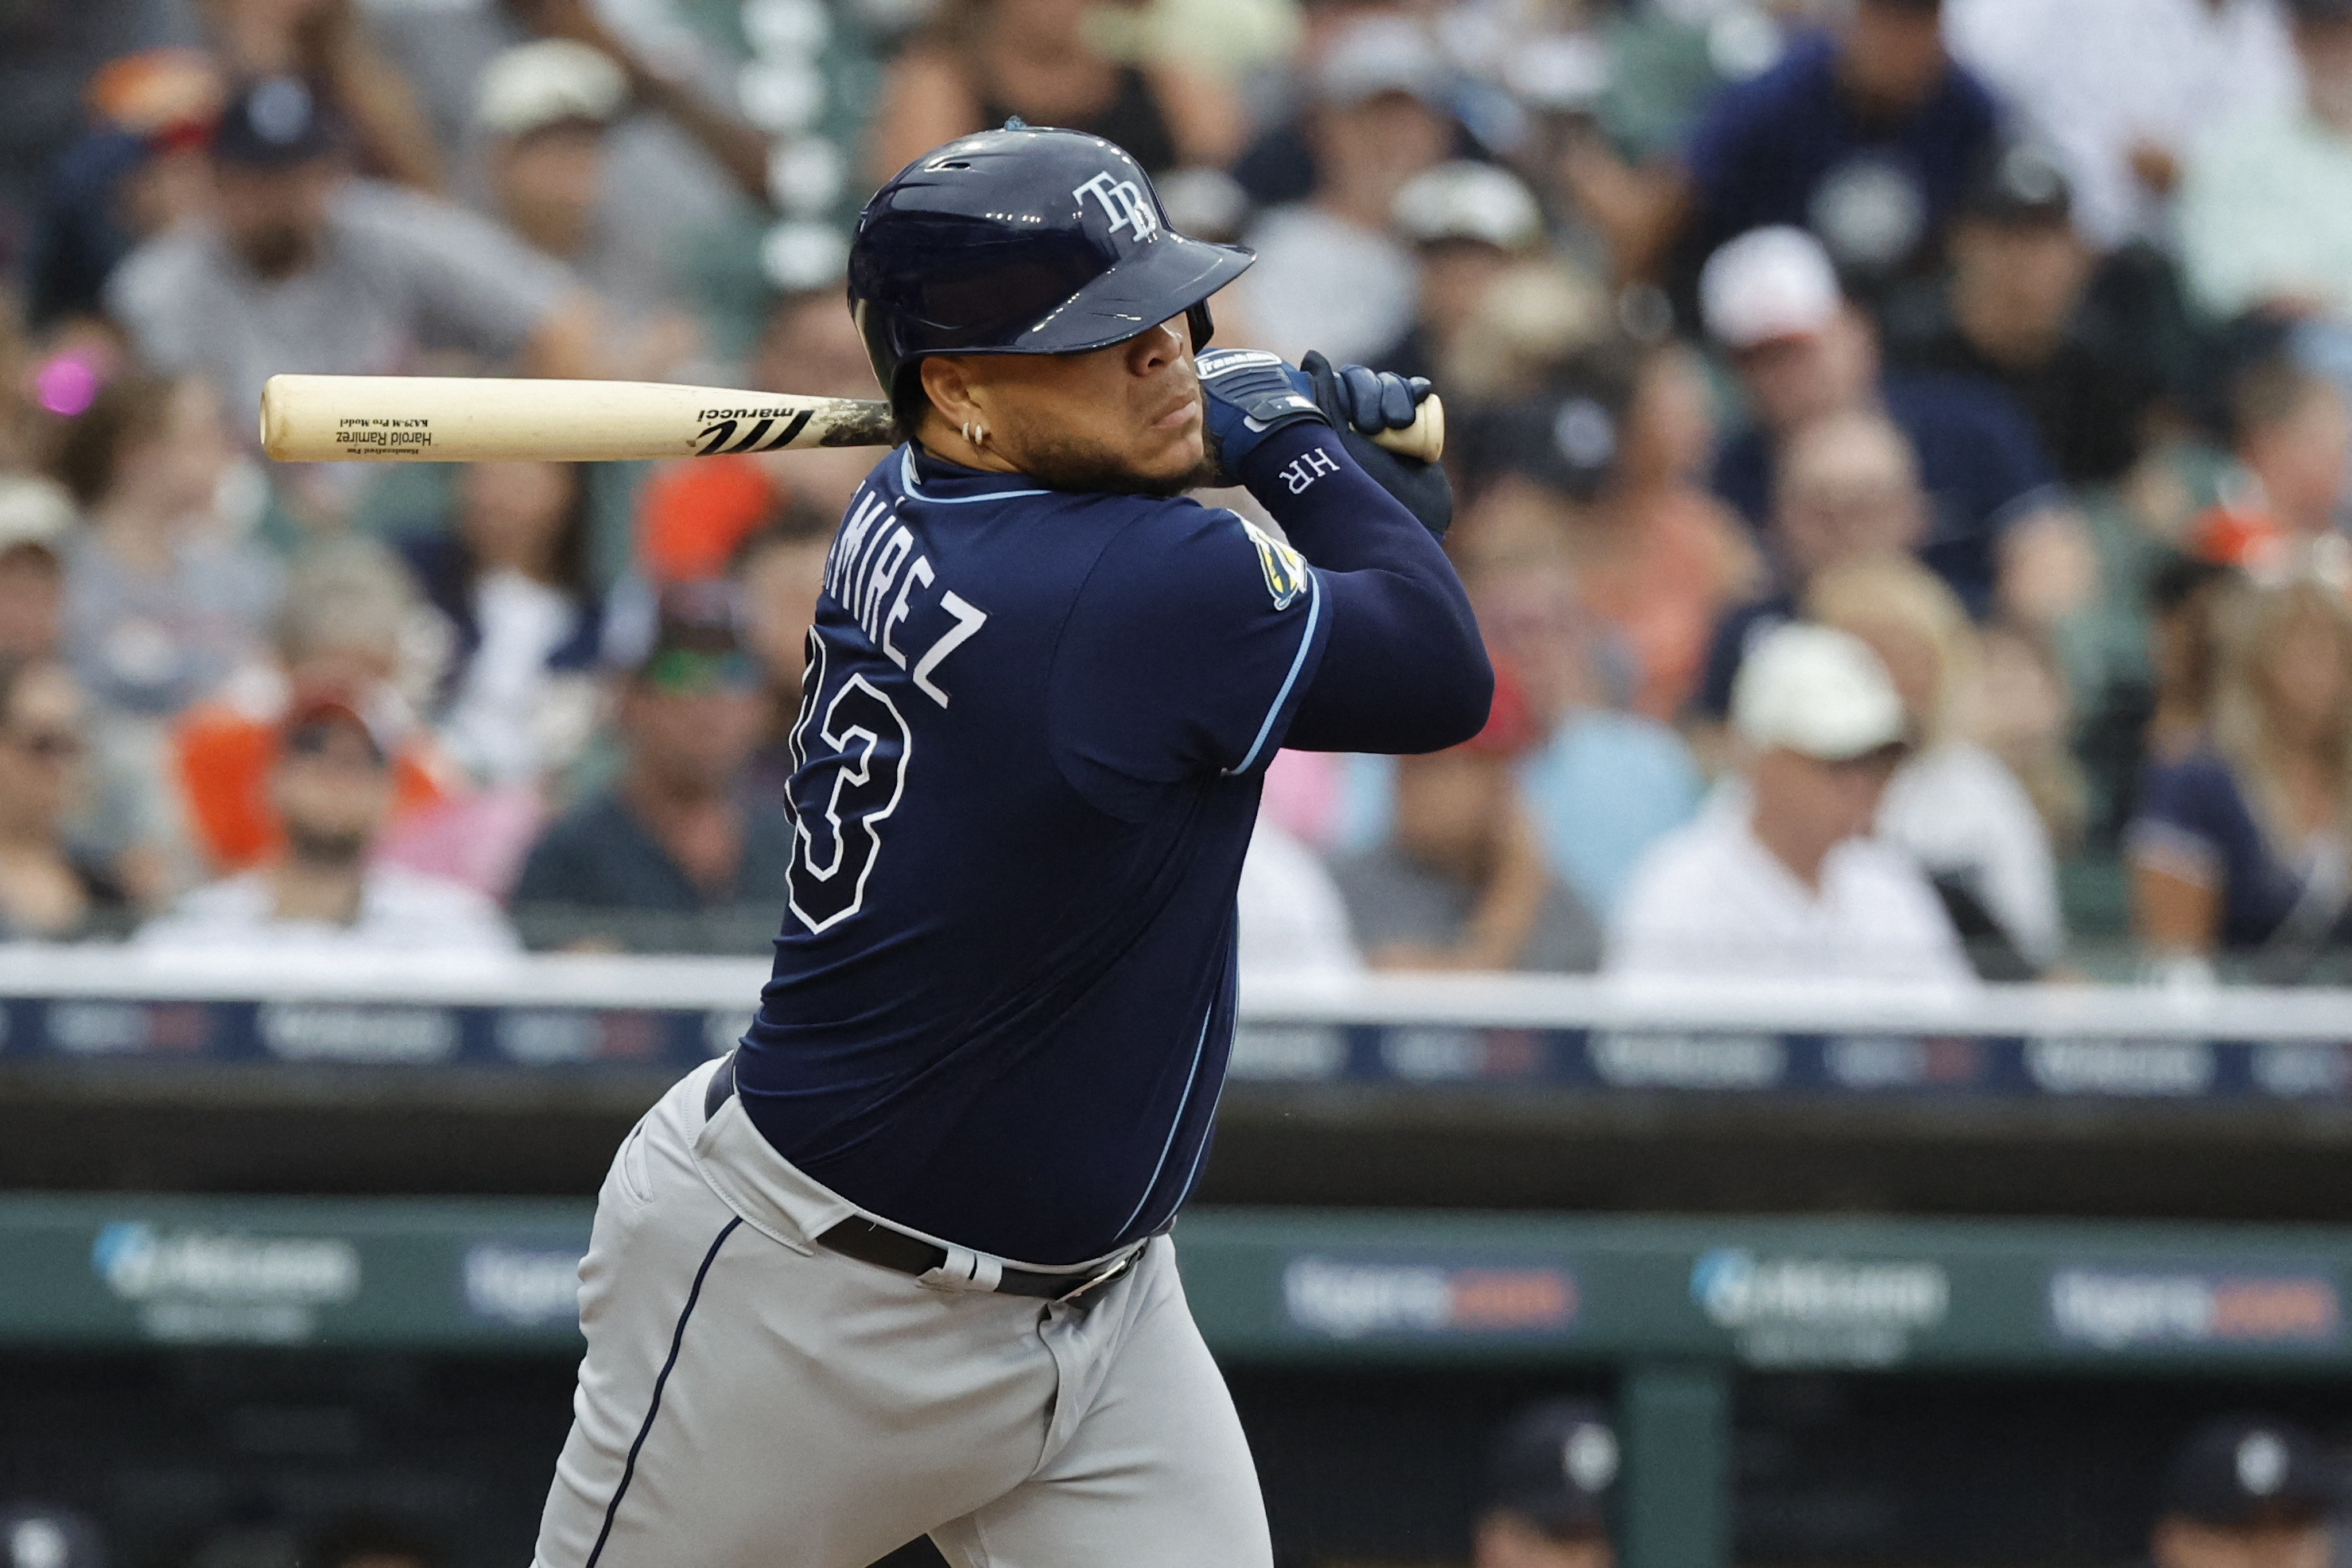 Díaz, Franco lead Rays to 10-6 win over Tigers